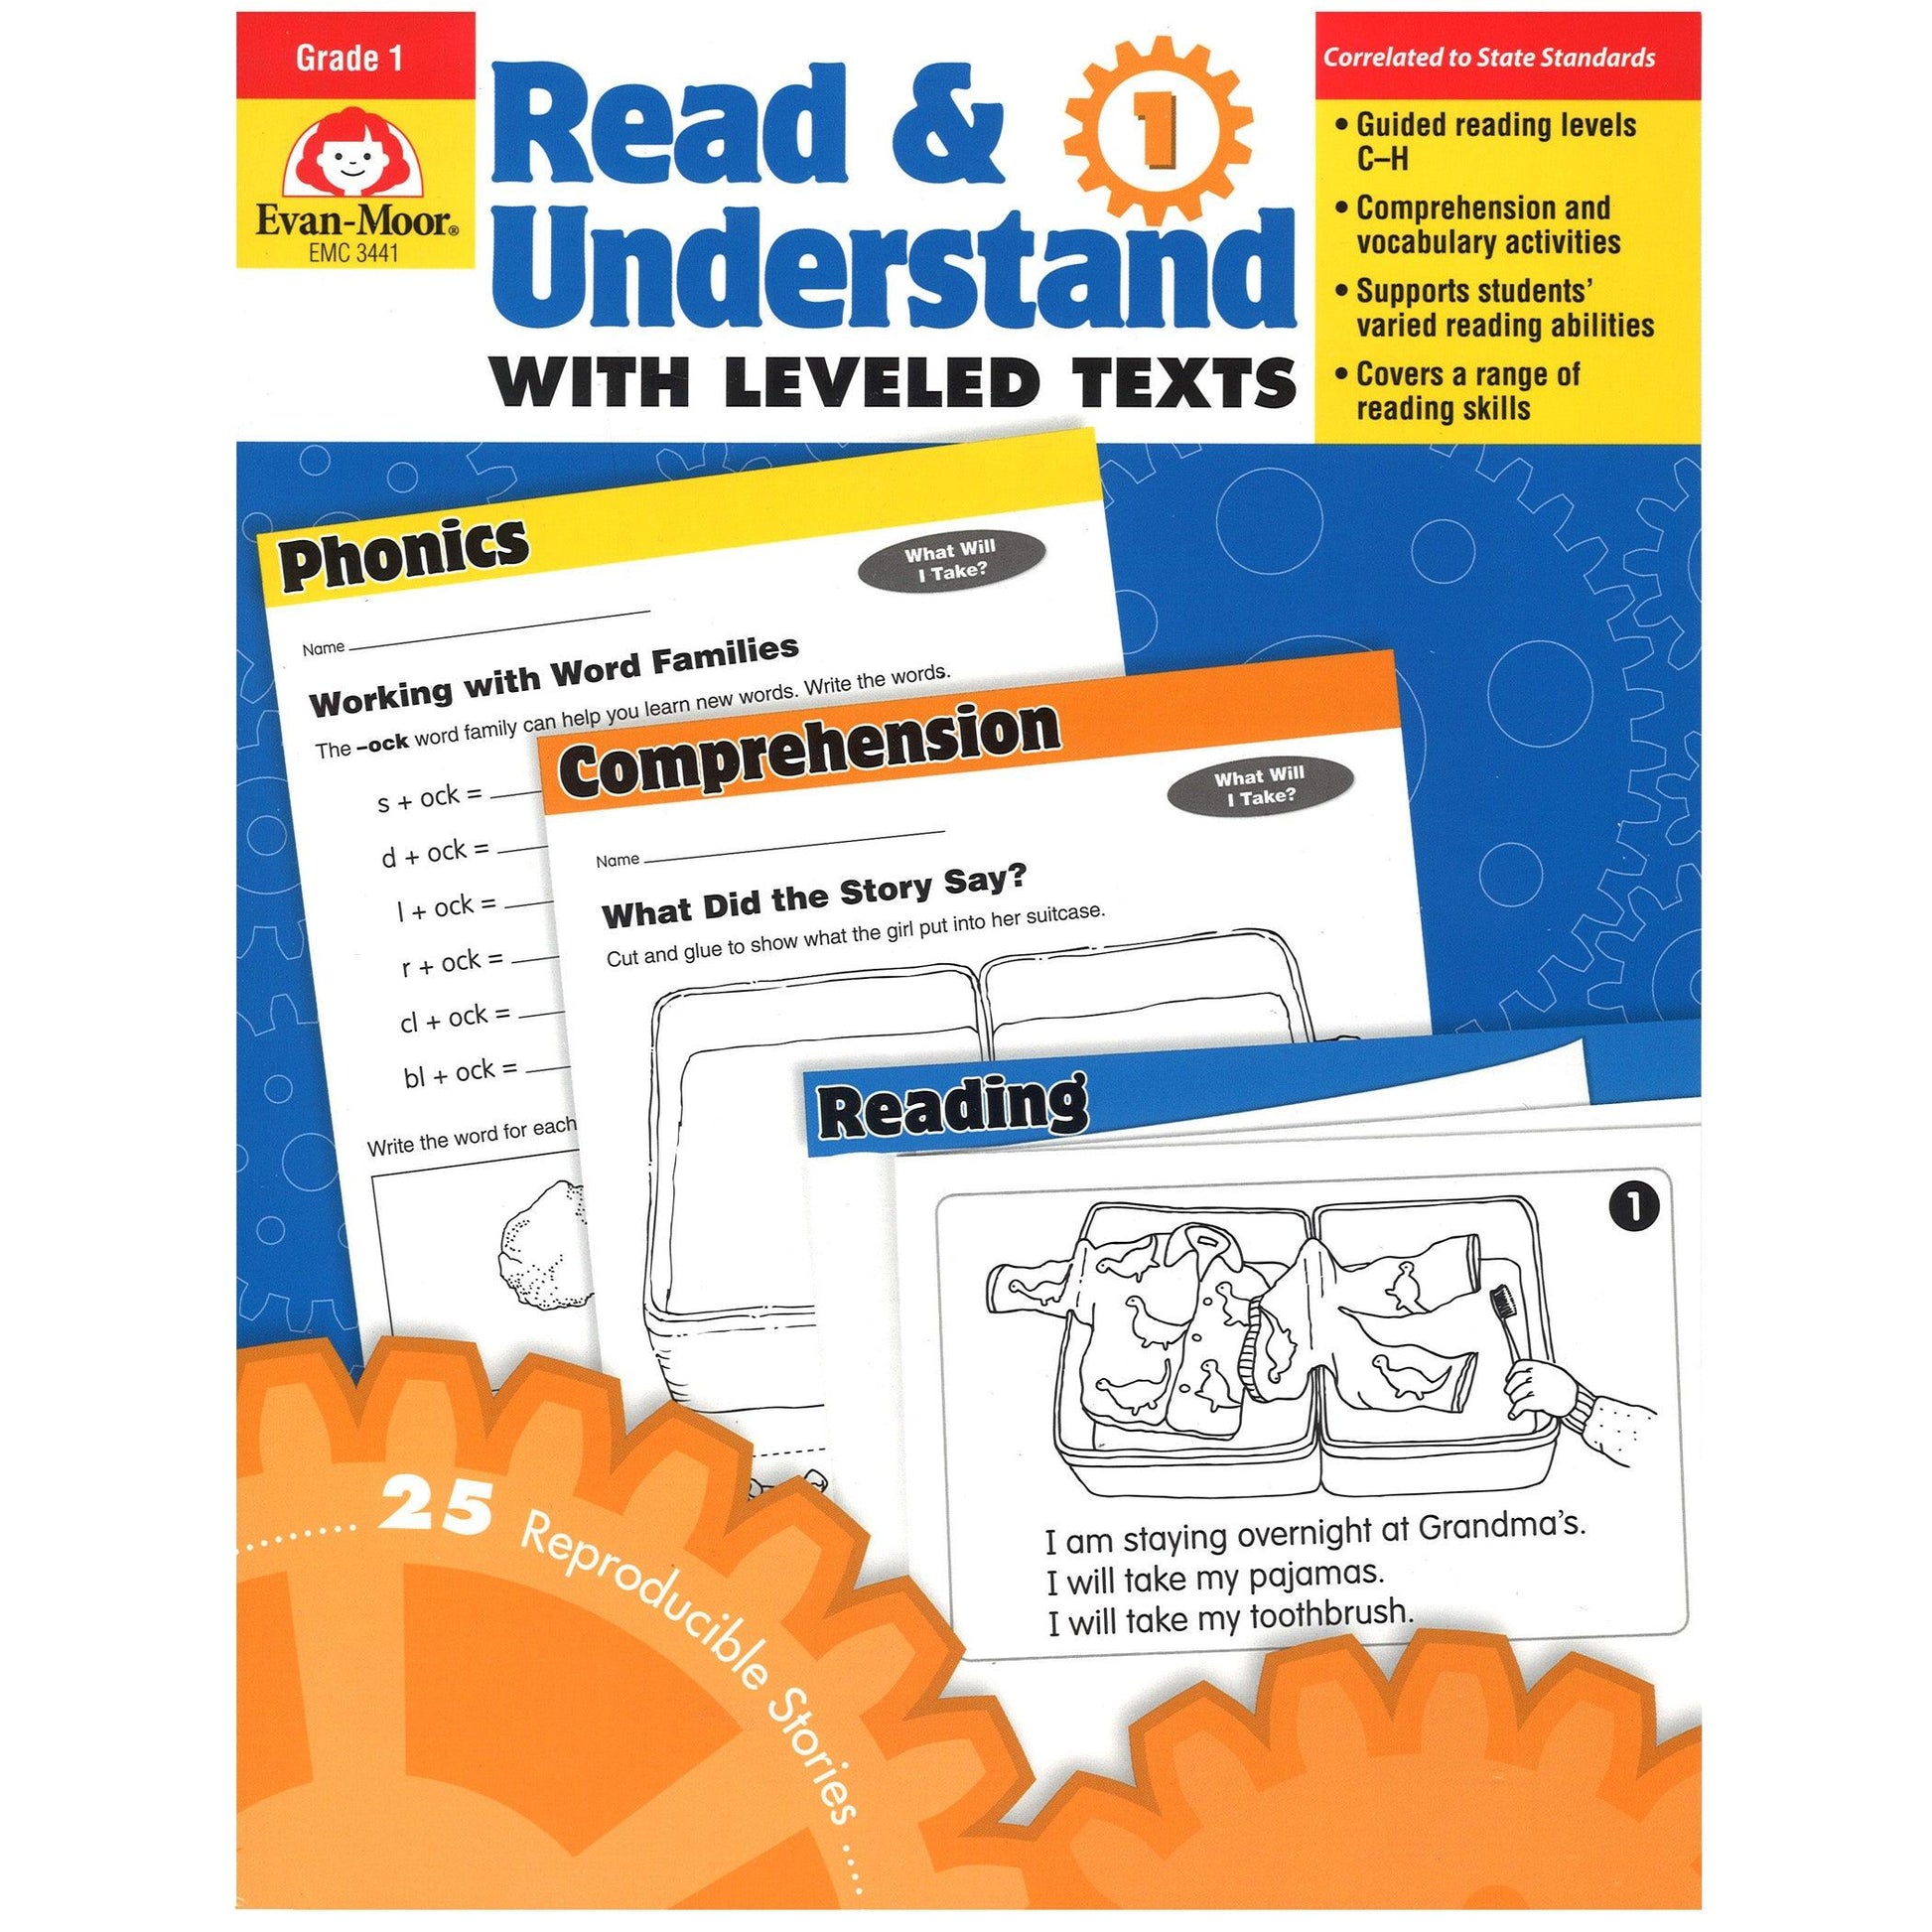 Read & Understand with Leveled Texts Book, Grade 1 - Loomini